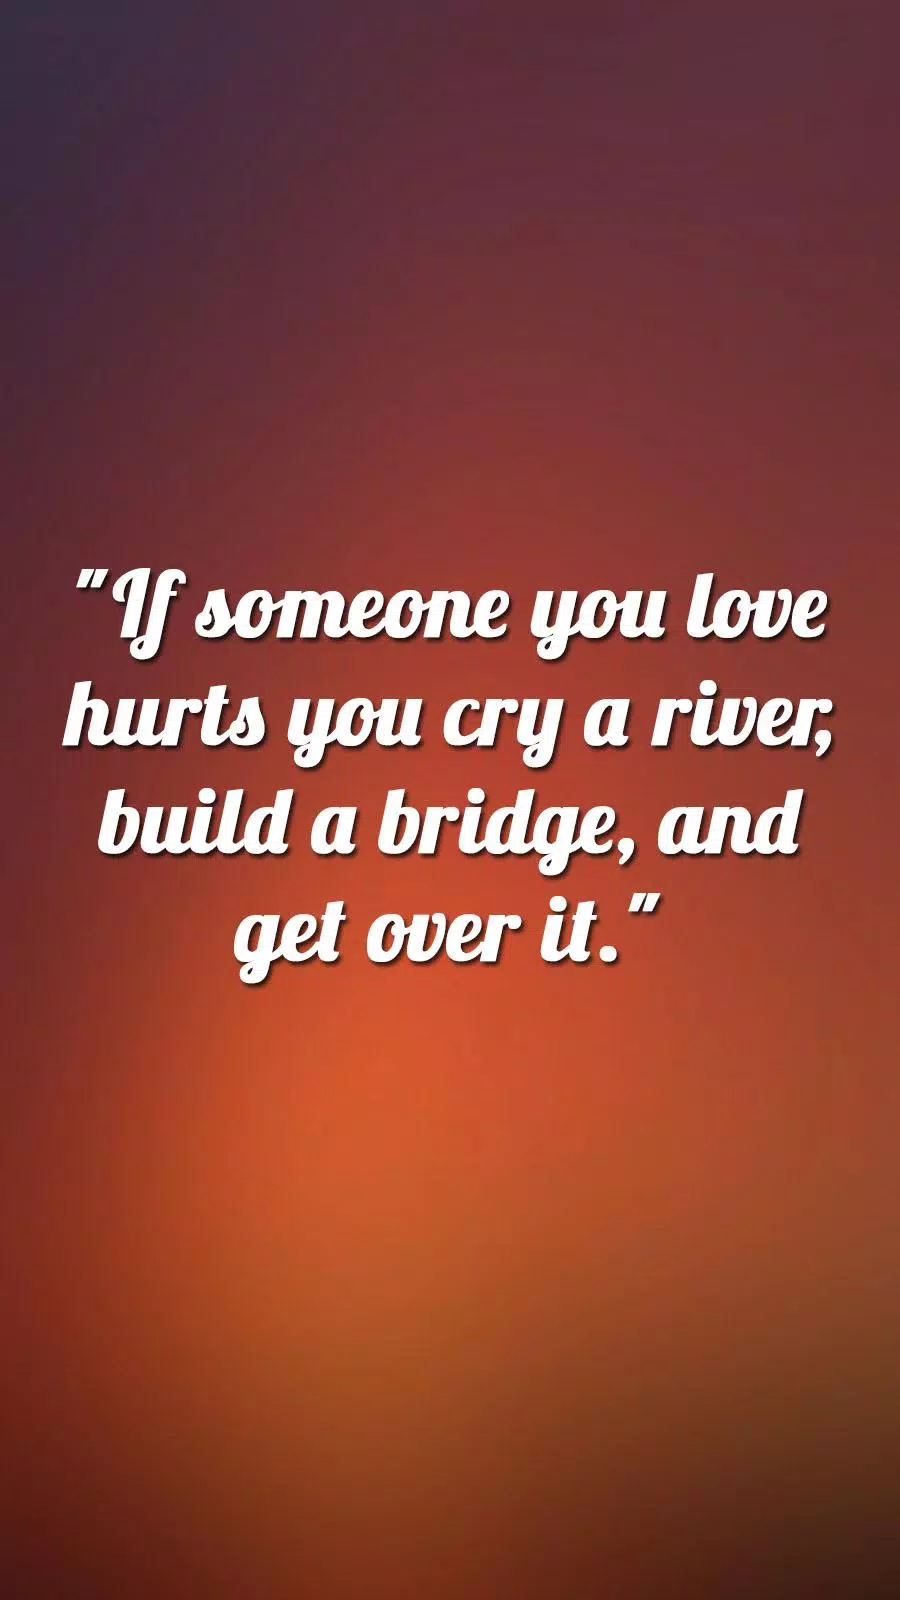 Love Breakup Quotes For Him - Broken Heart Sayings APK for Android ...